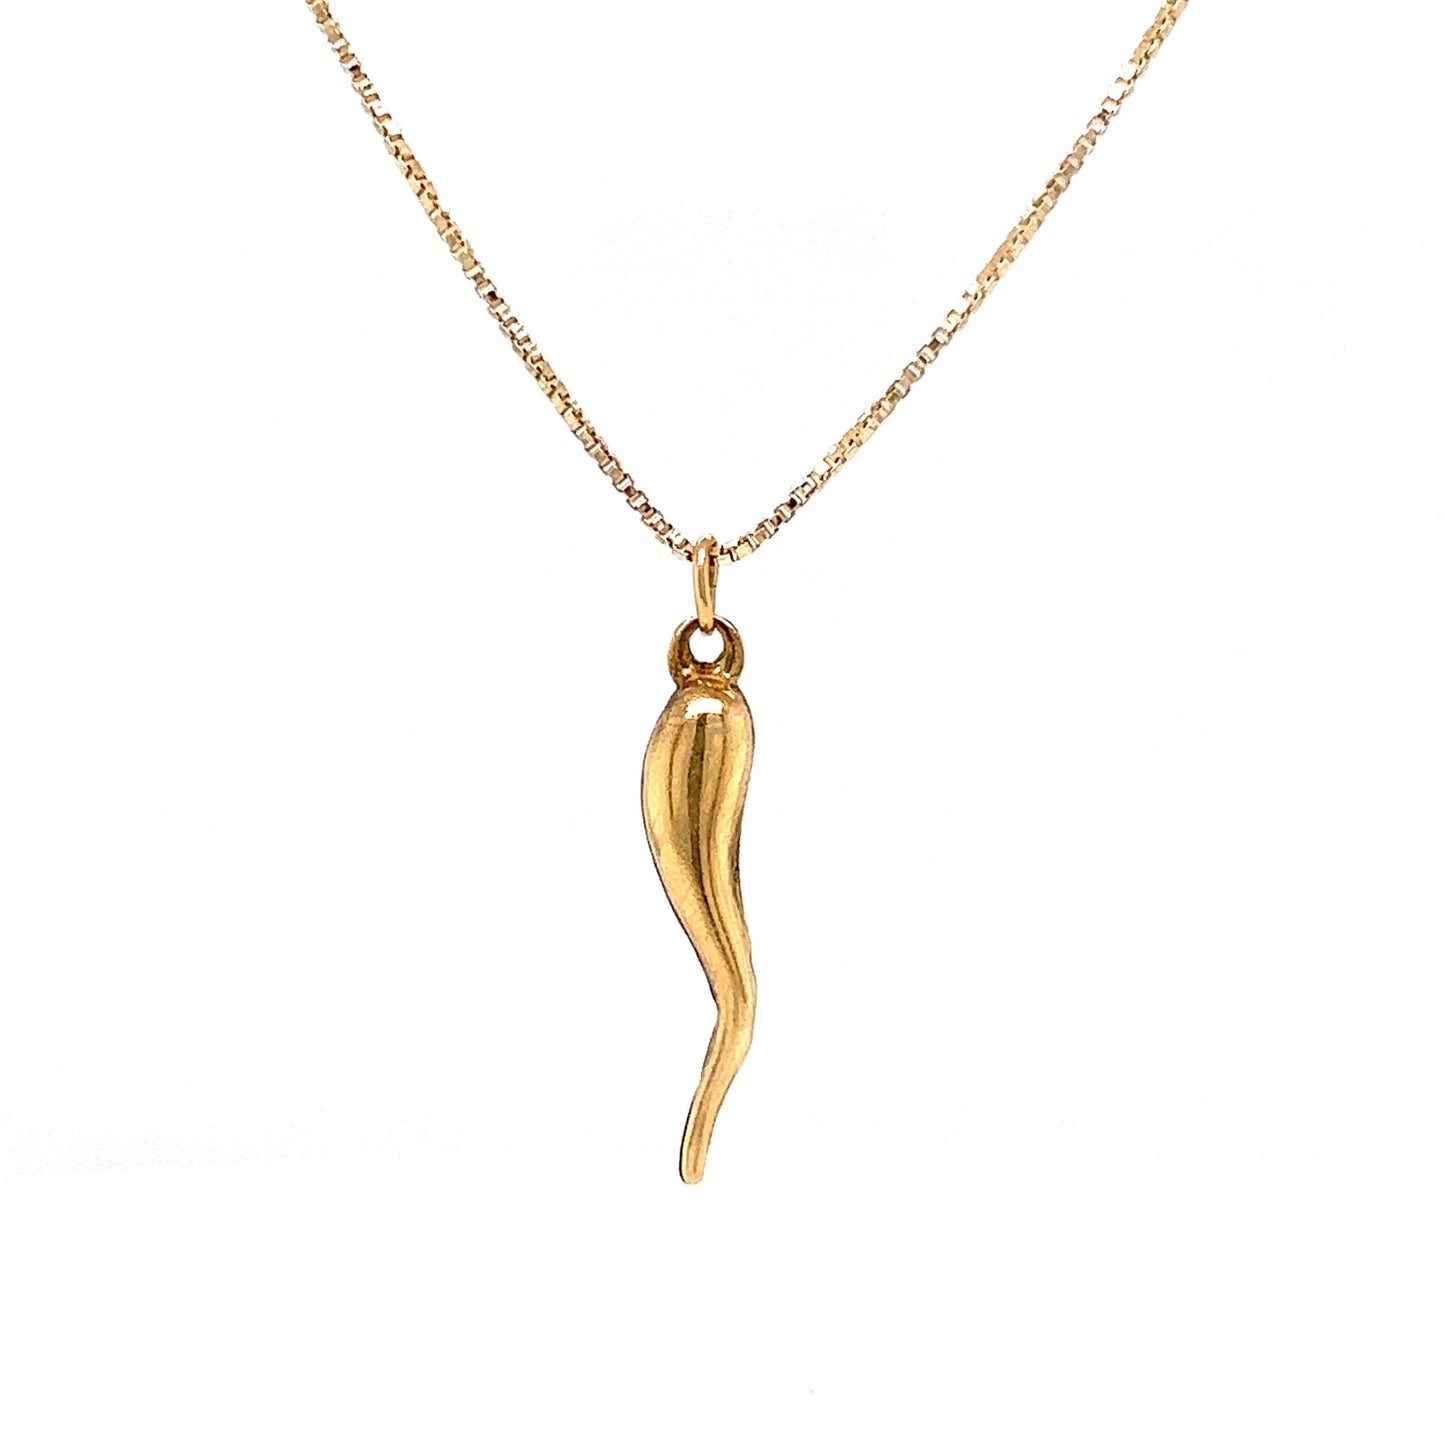 Adjustable Length Cornicello Pendant Necklace in 14k Yellow Gold